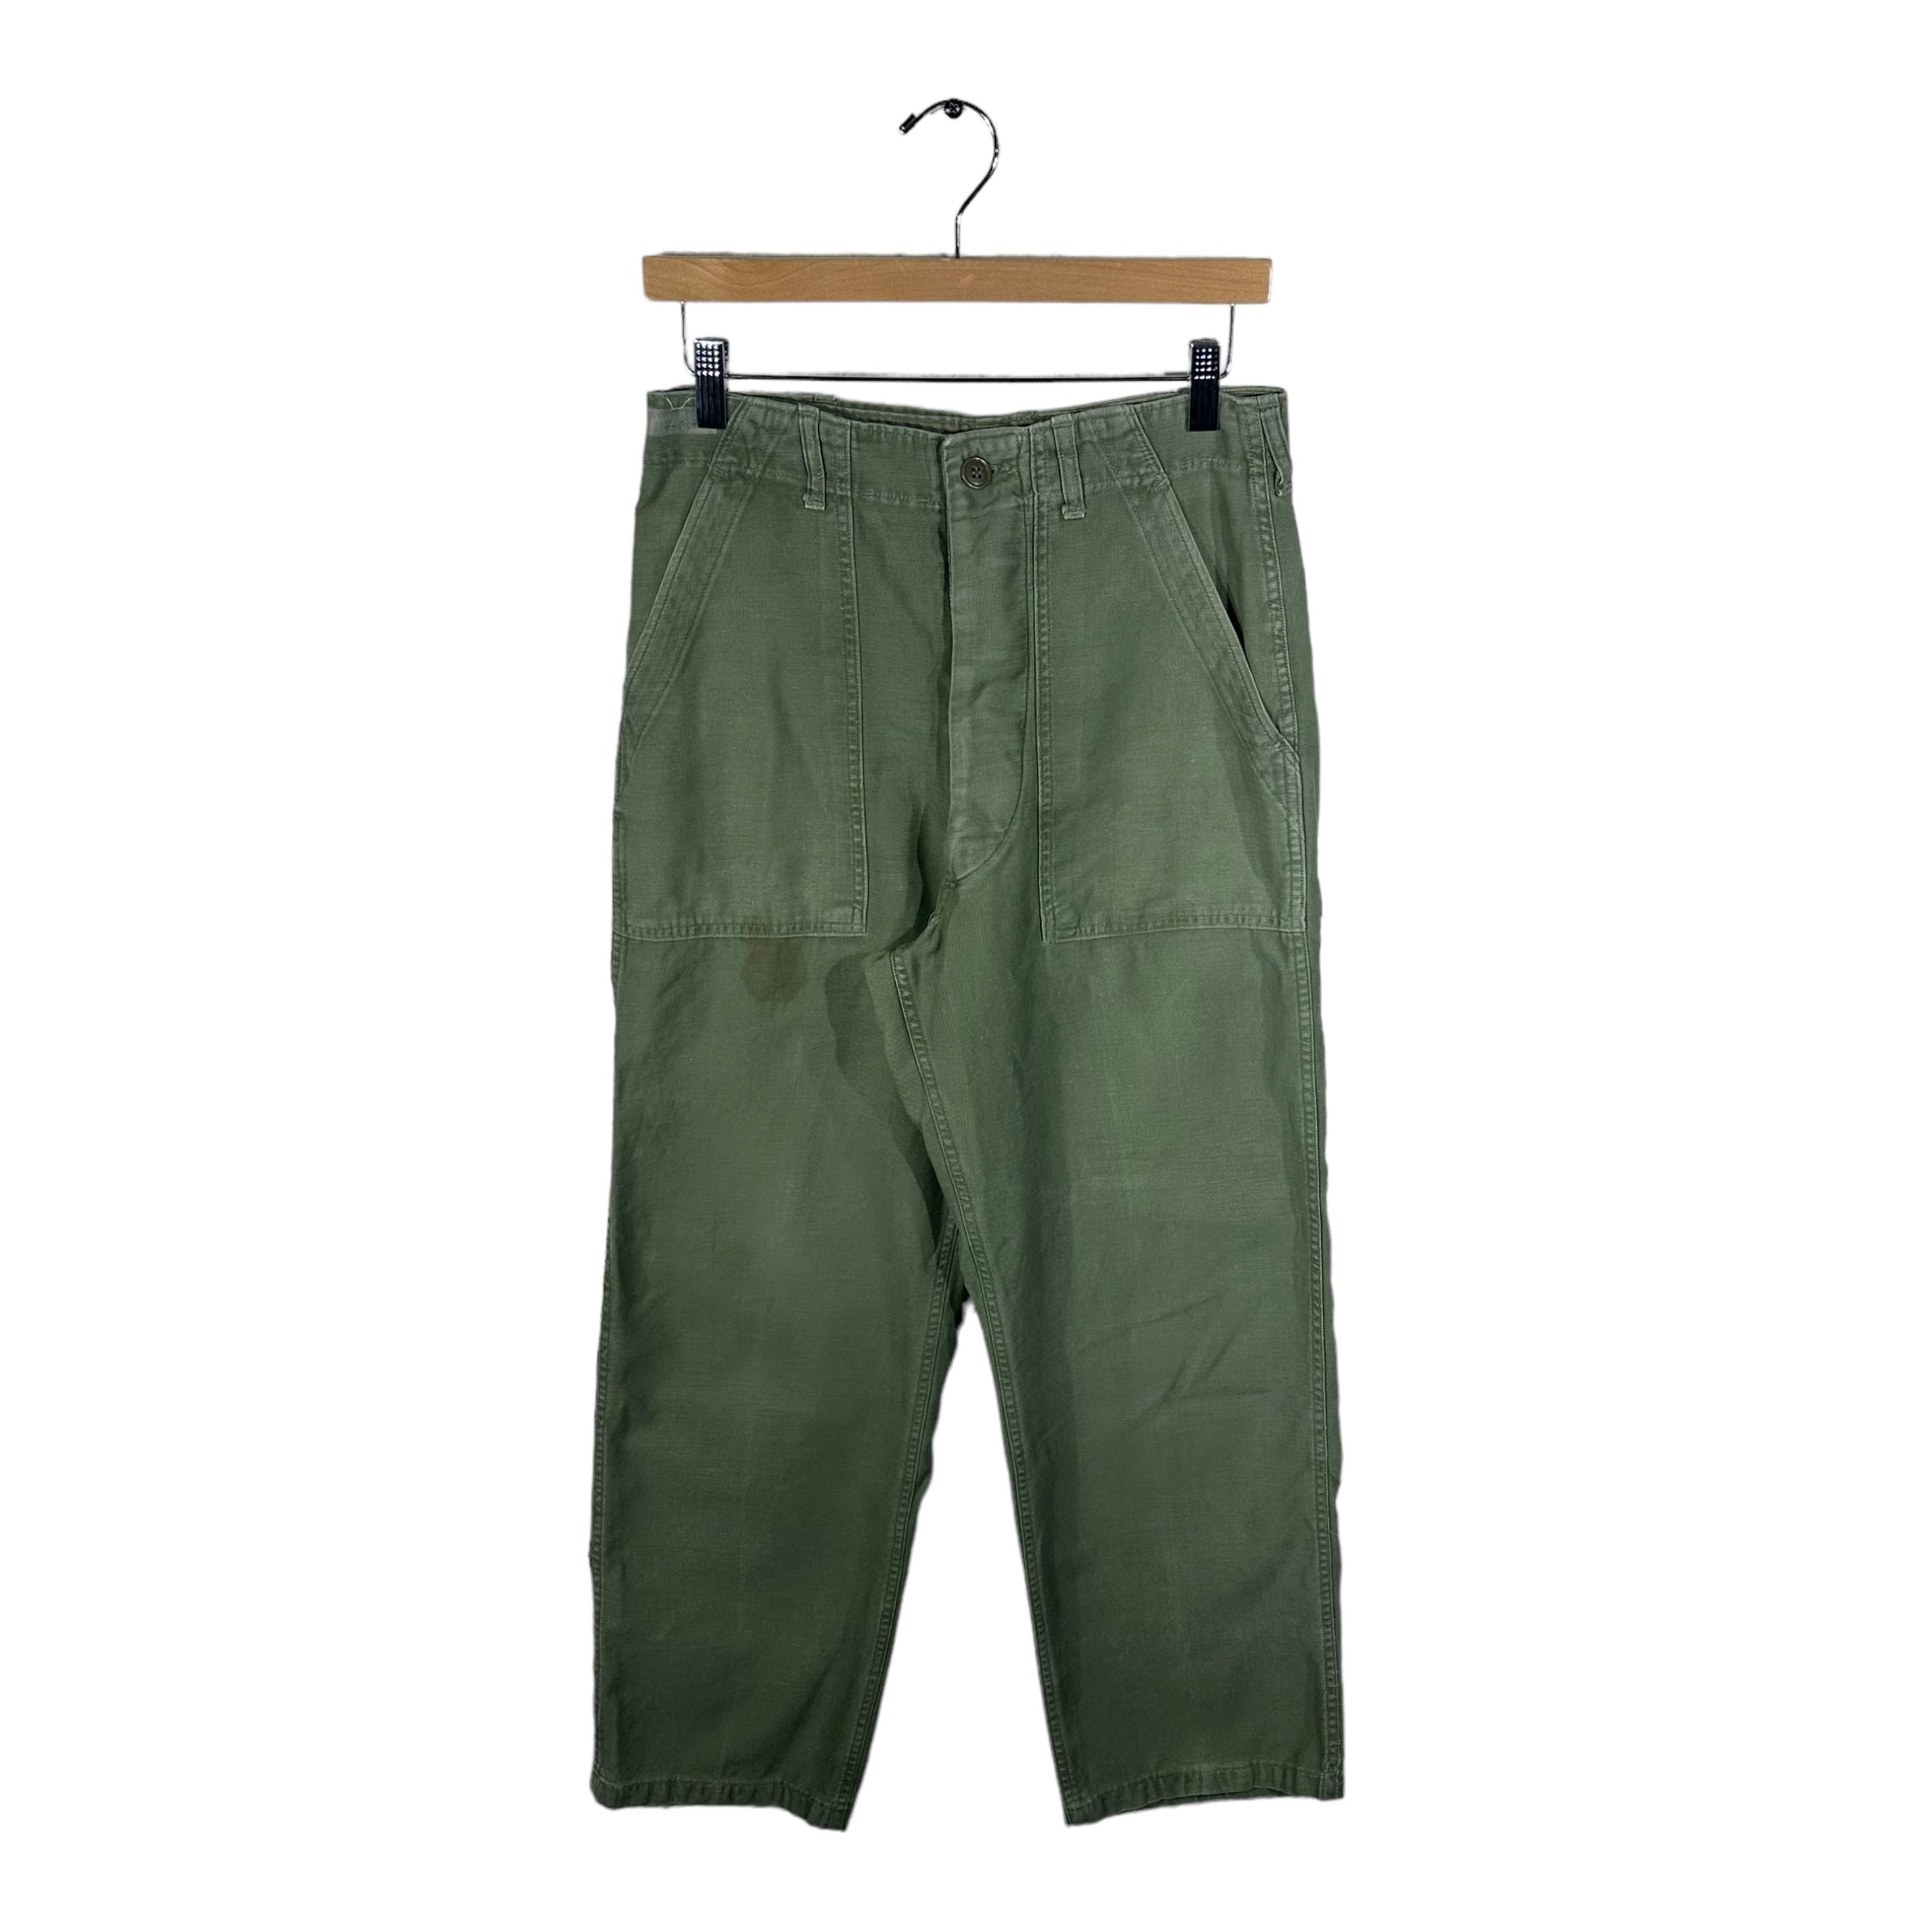 Vintage Military Button Fly Cargo Pants